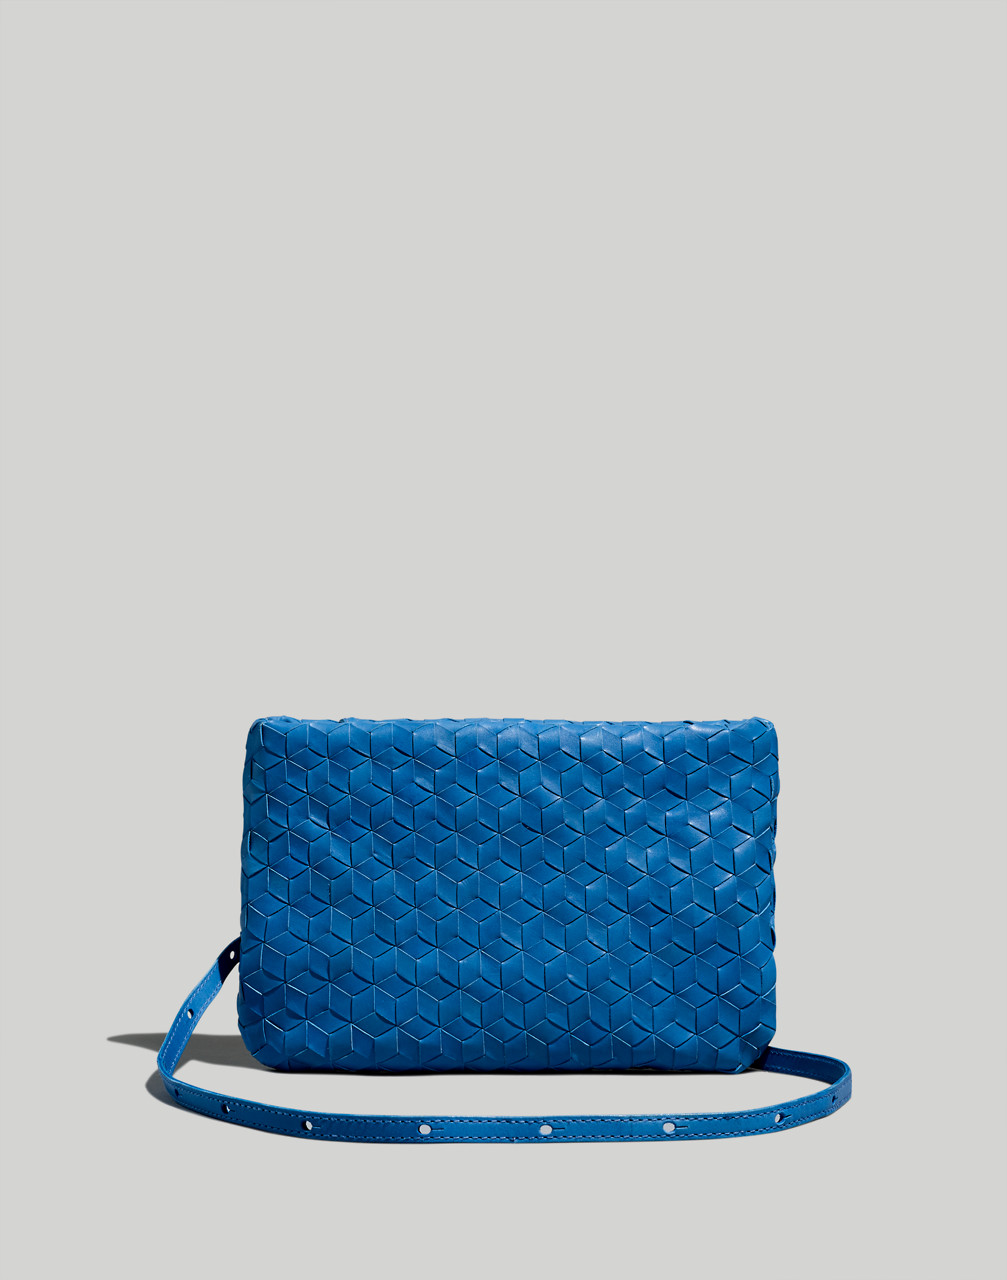 Mw The Puff Crossbody Bag: Woven Leather Edition In Blue